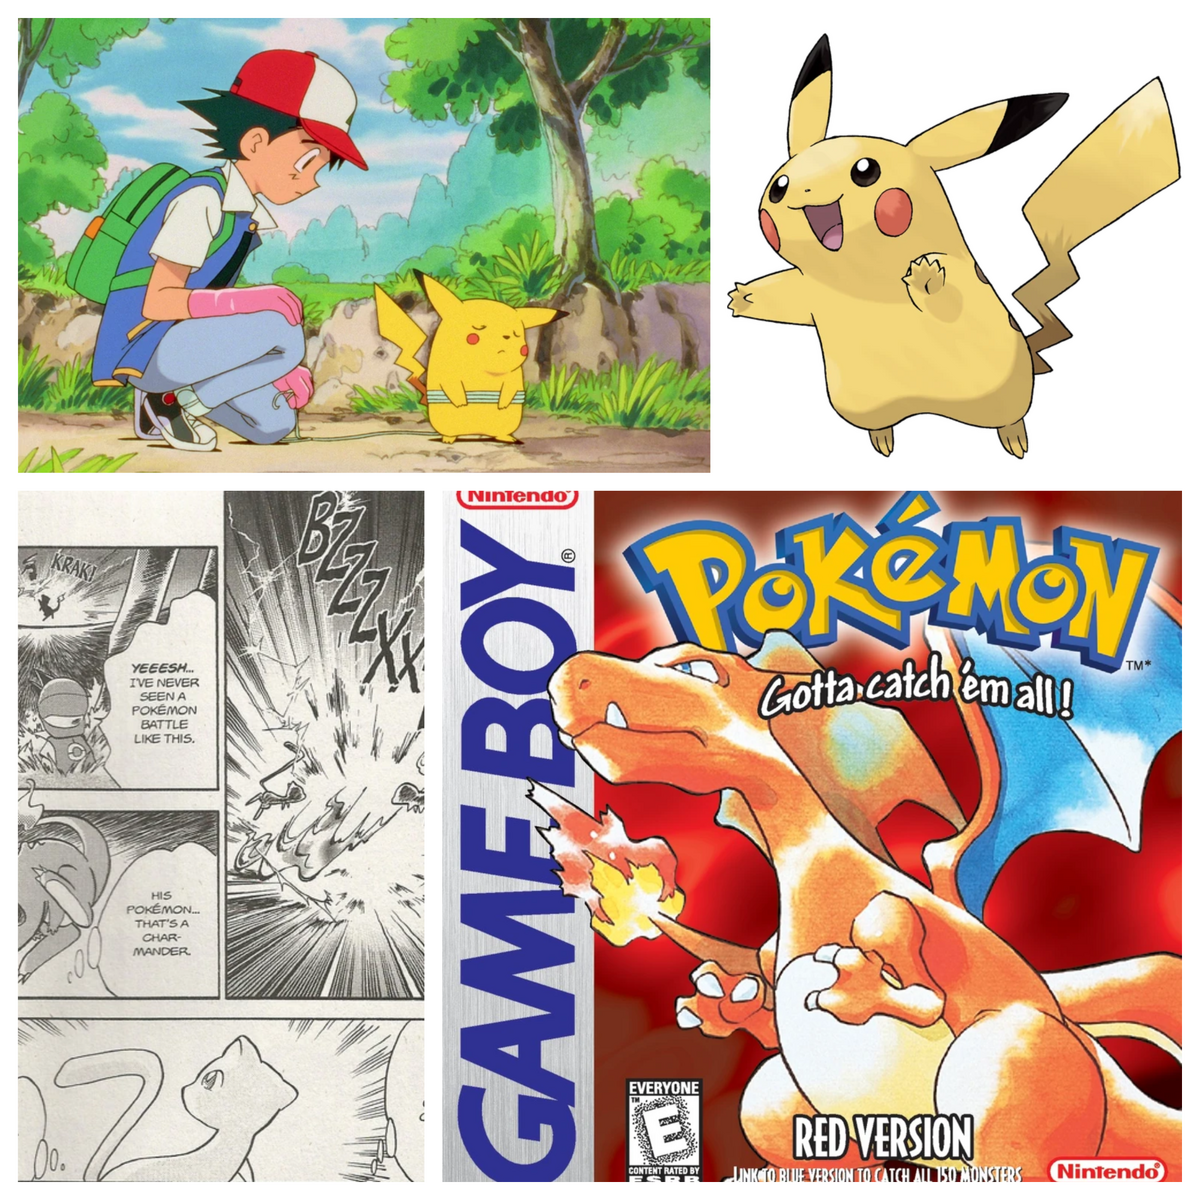 VC versions of Pokemon Red, Blue, Yellow & Green don't support the